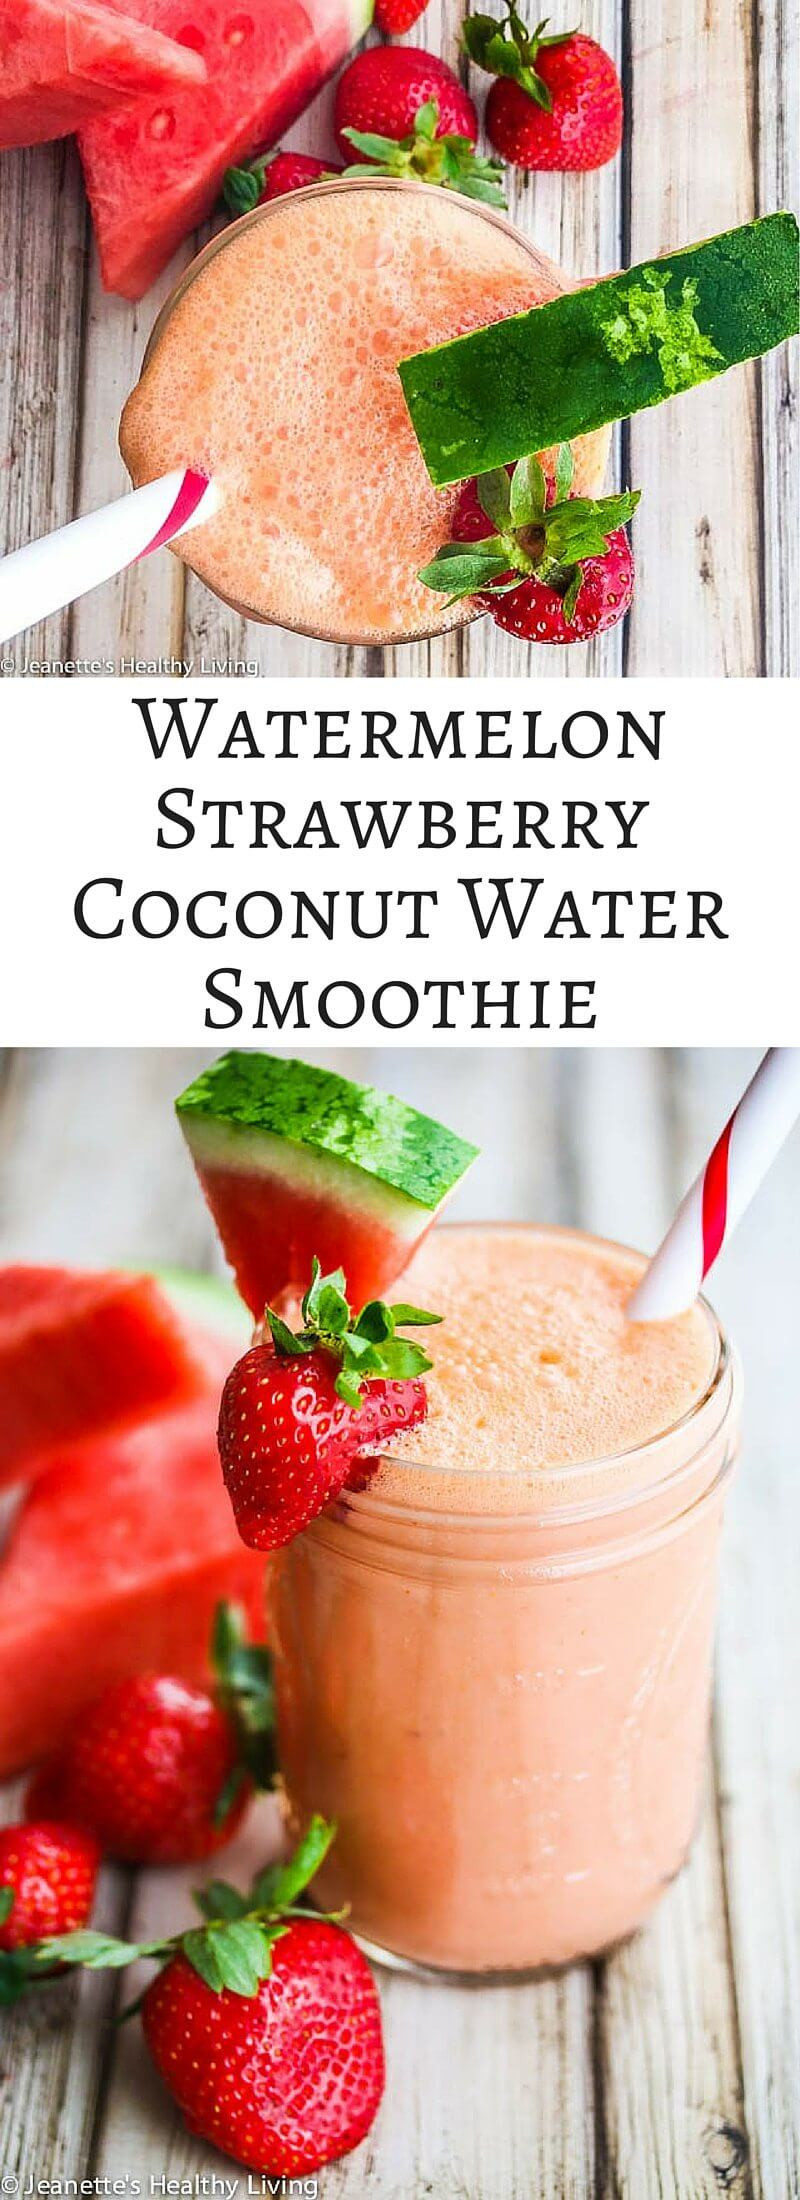 Coconut Water Smoothie Recipes
 coconut water strawberry smoothie